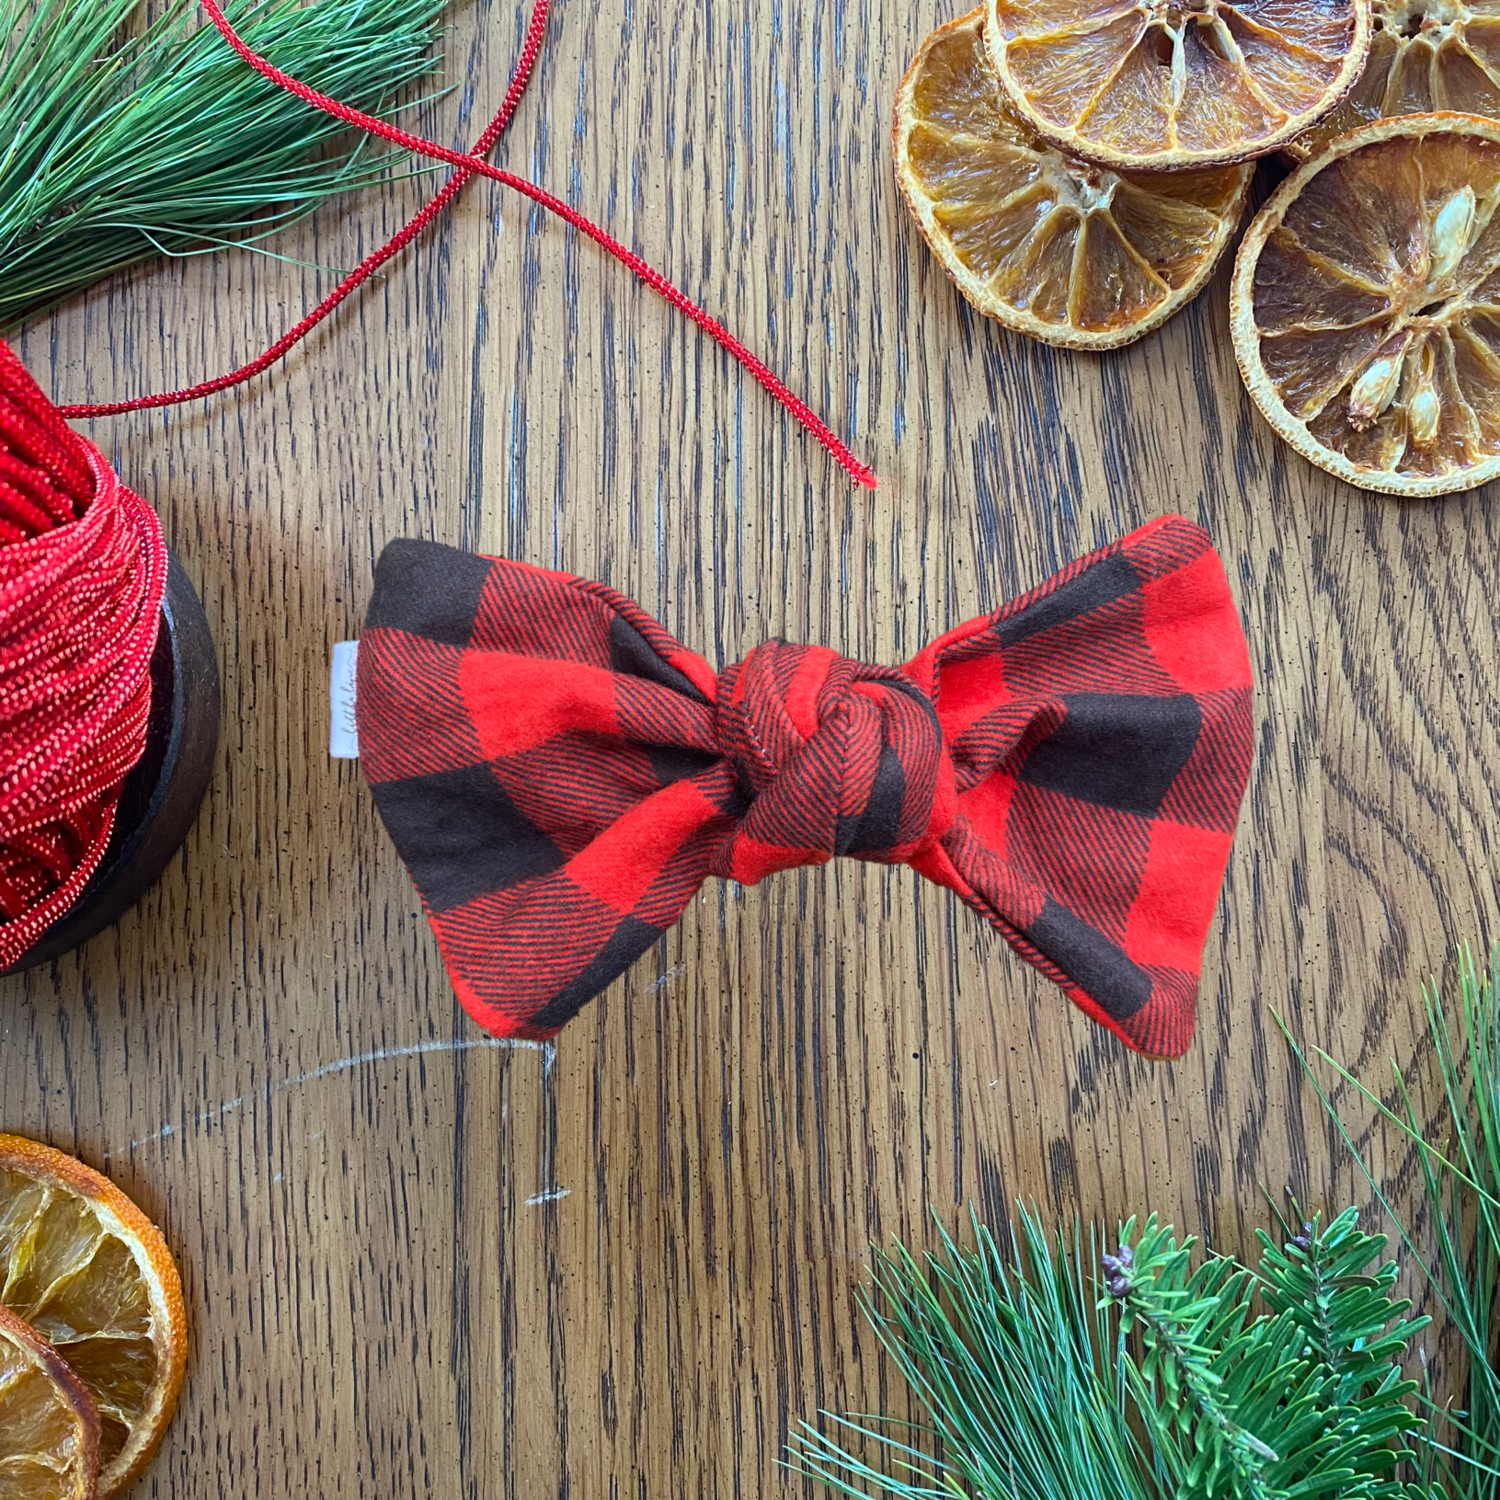 JACK KNOTTED BOW TIE